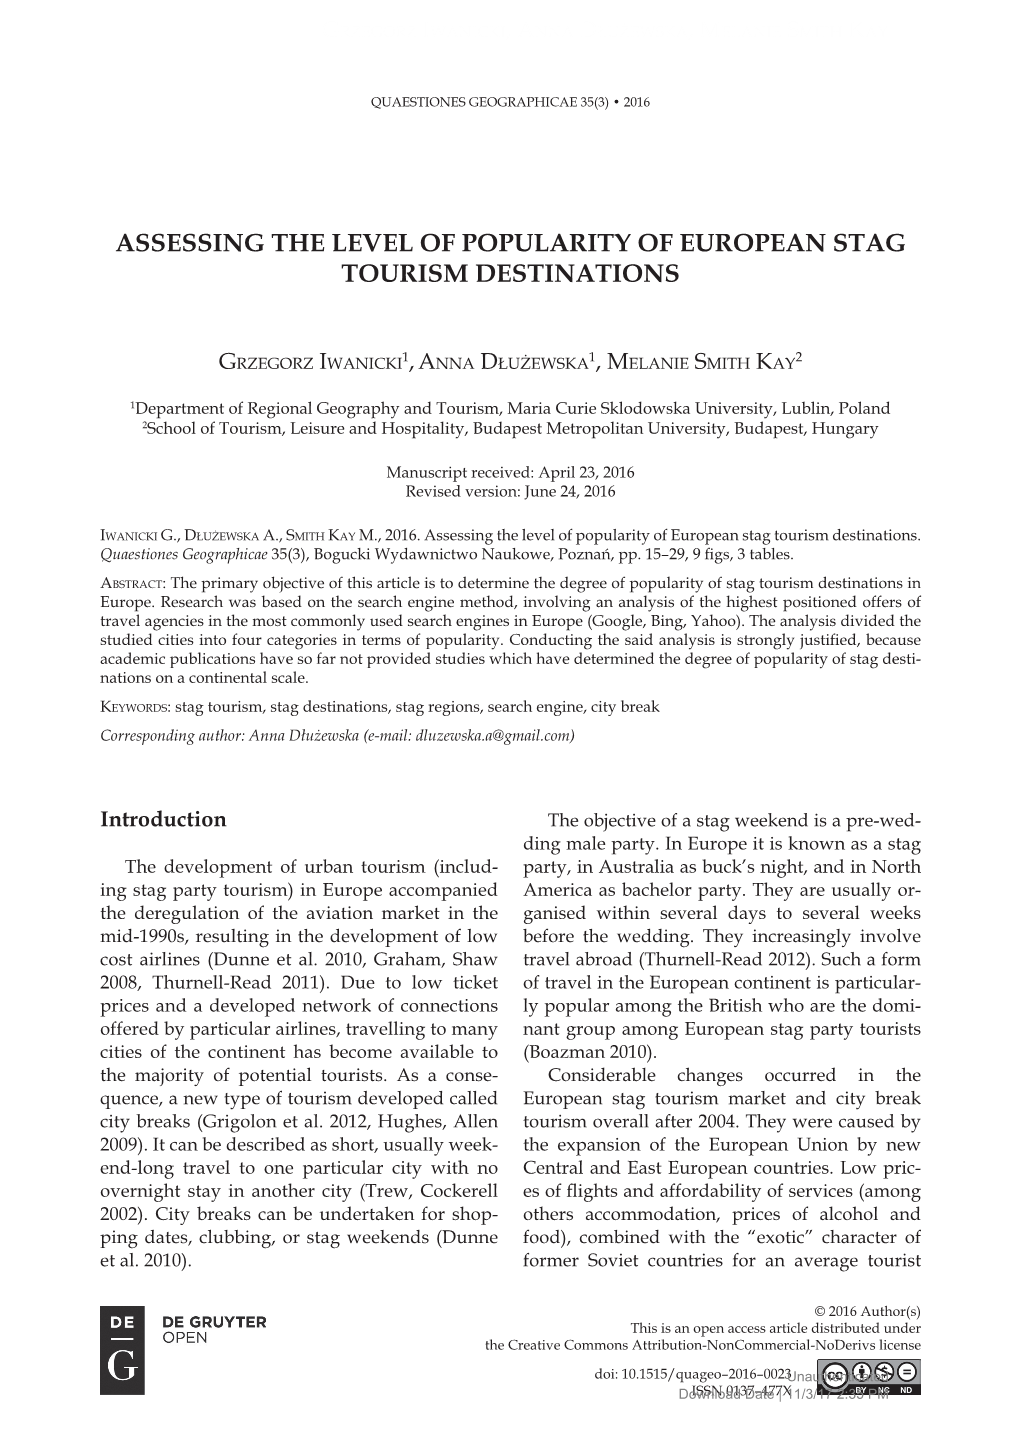 Assessing the Level of Popularity of European Stag Tourism Destinations